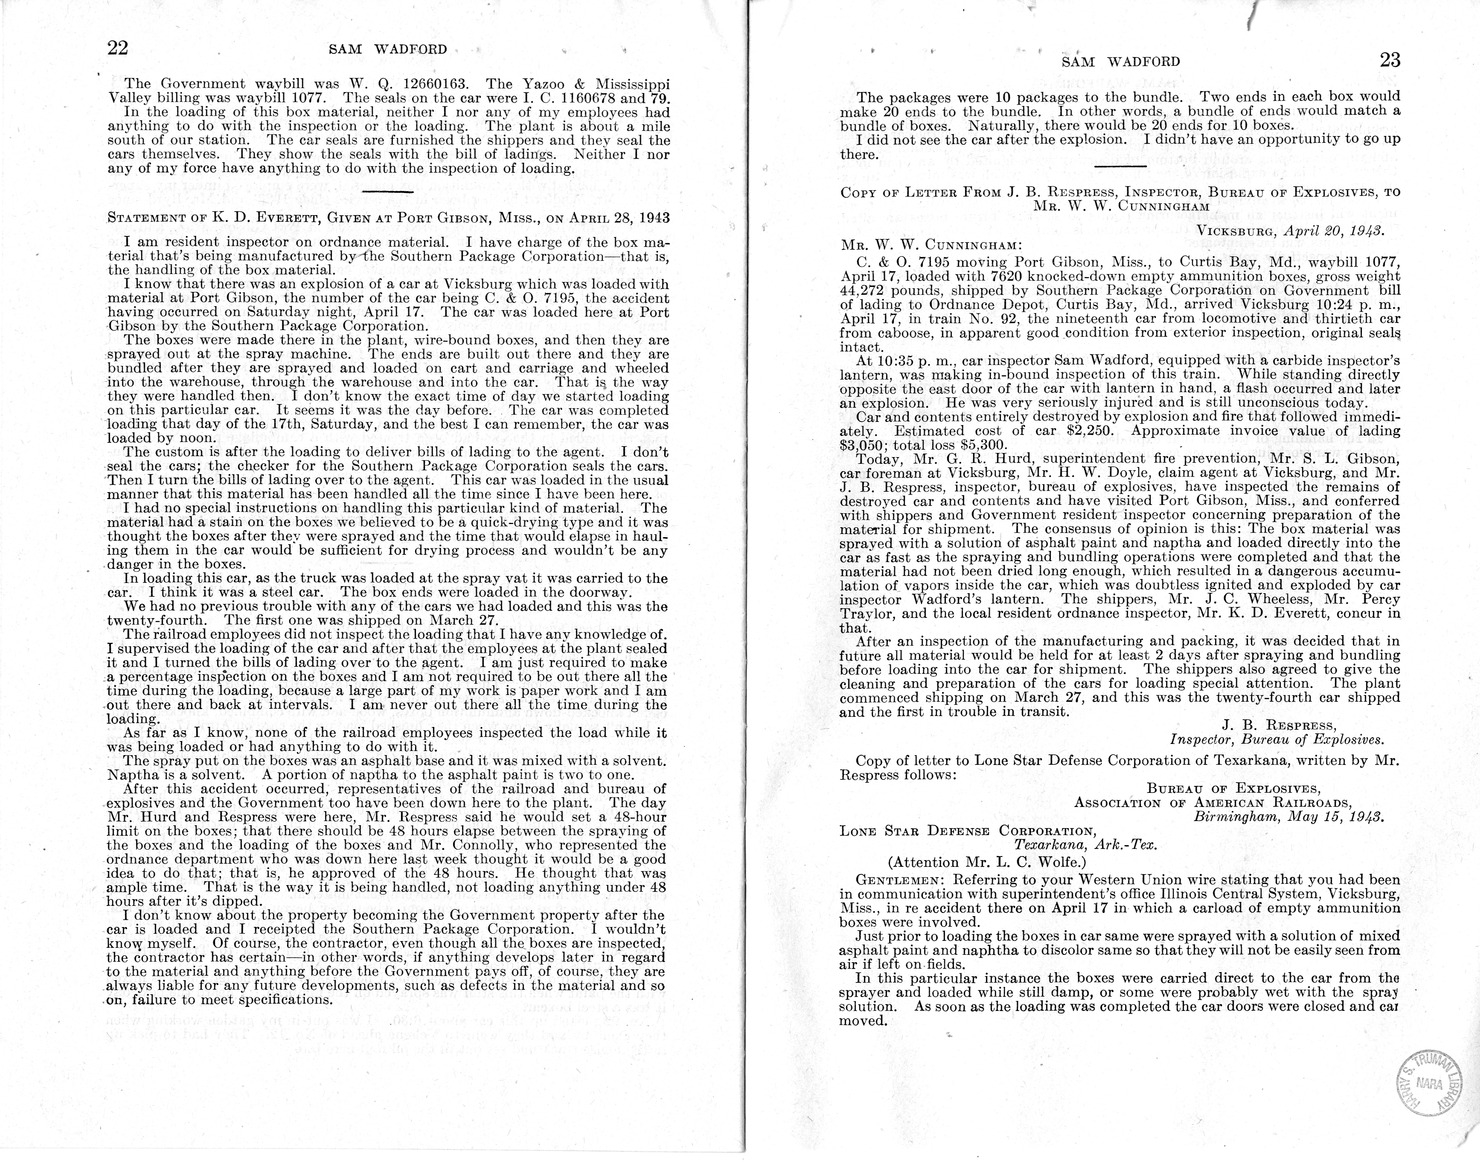 Memorandum from Frederick J. Bailey to M. C. Latta, H.R. 1482, For the Relief of the Legal Guardian of Samuel Wadford, with Attachments